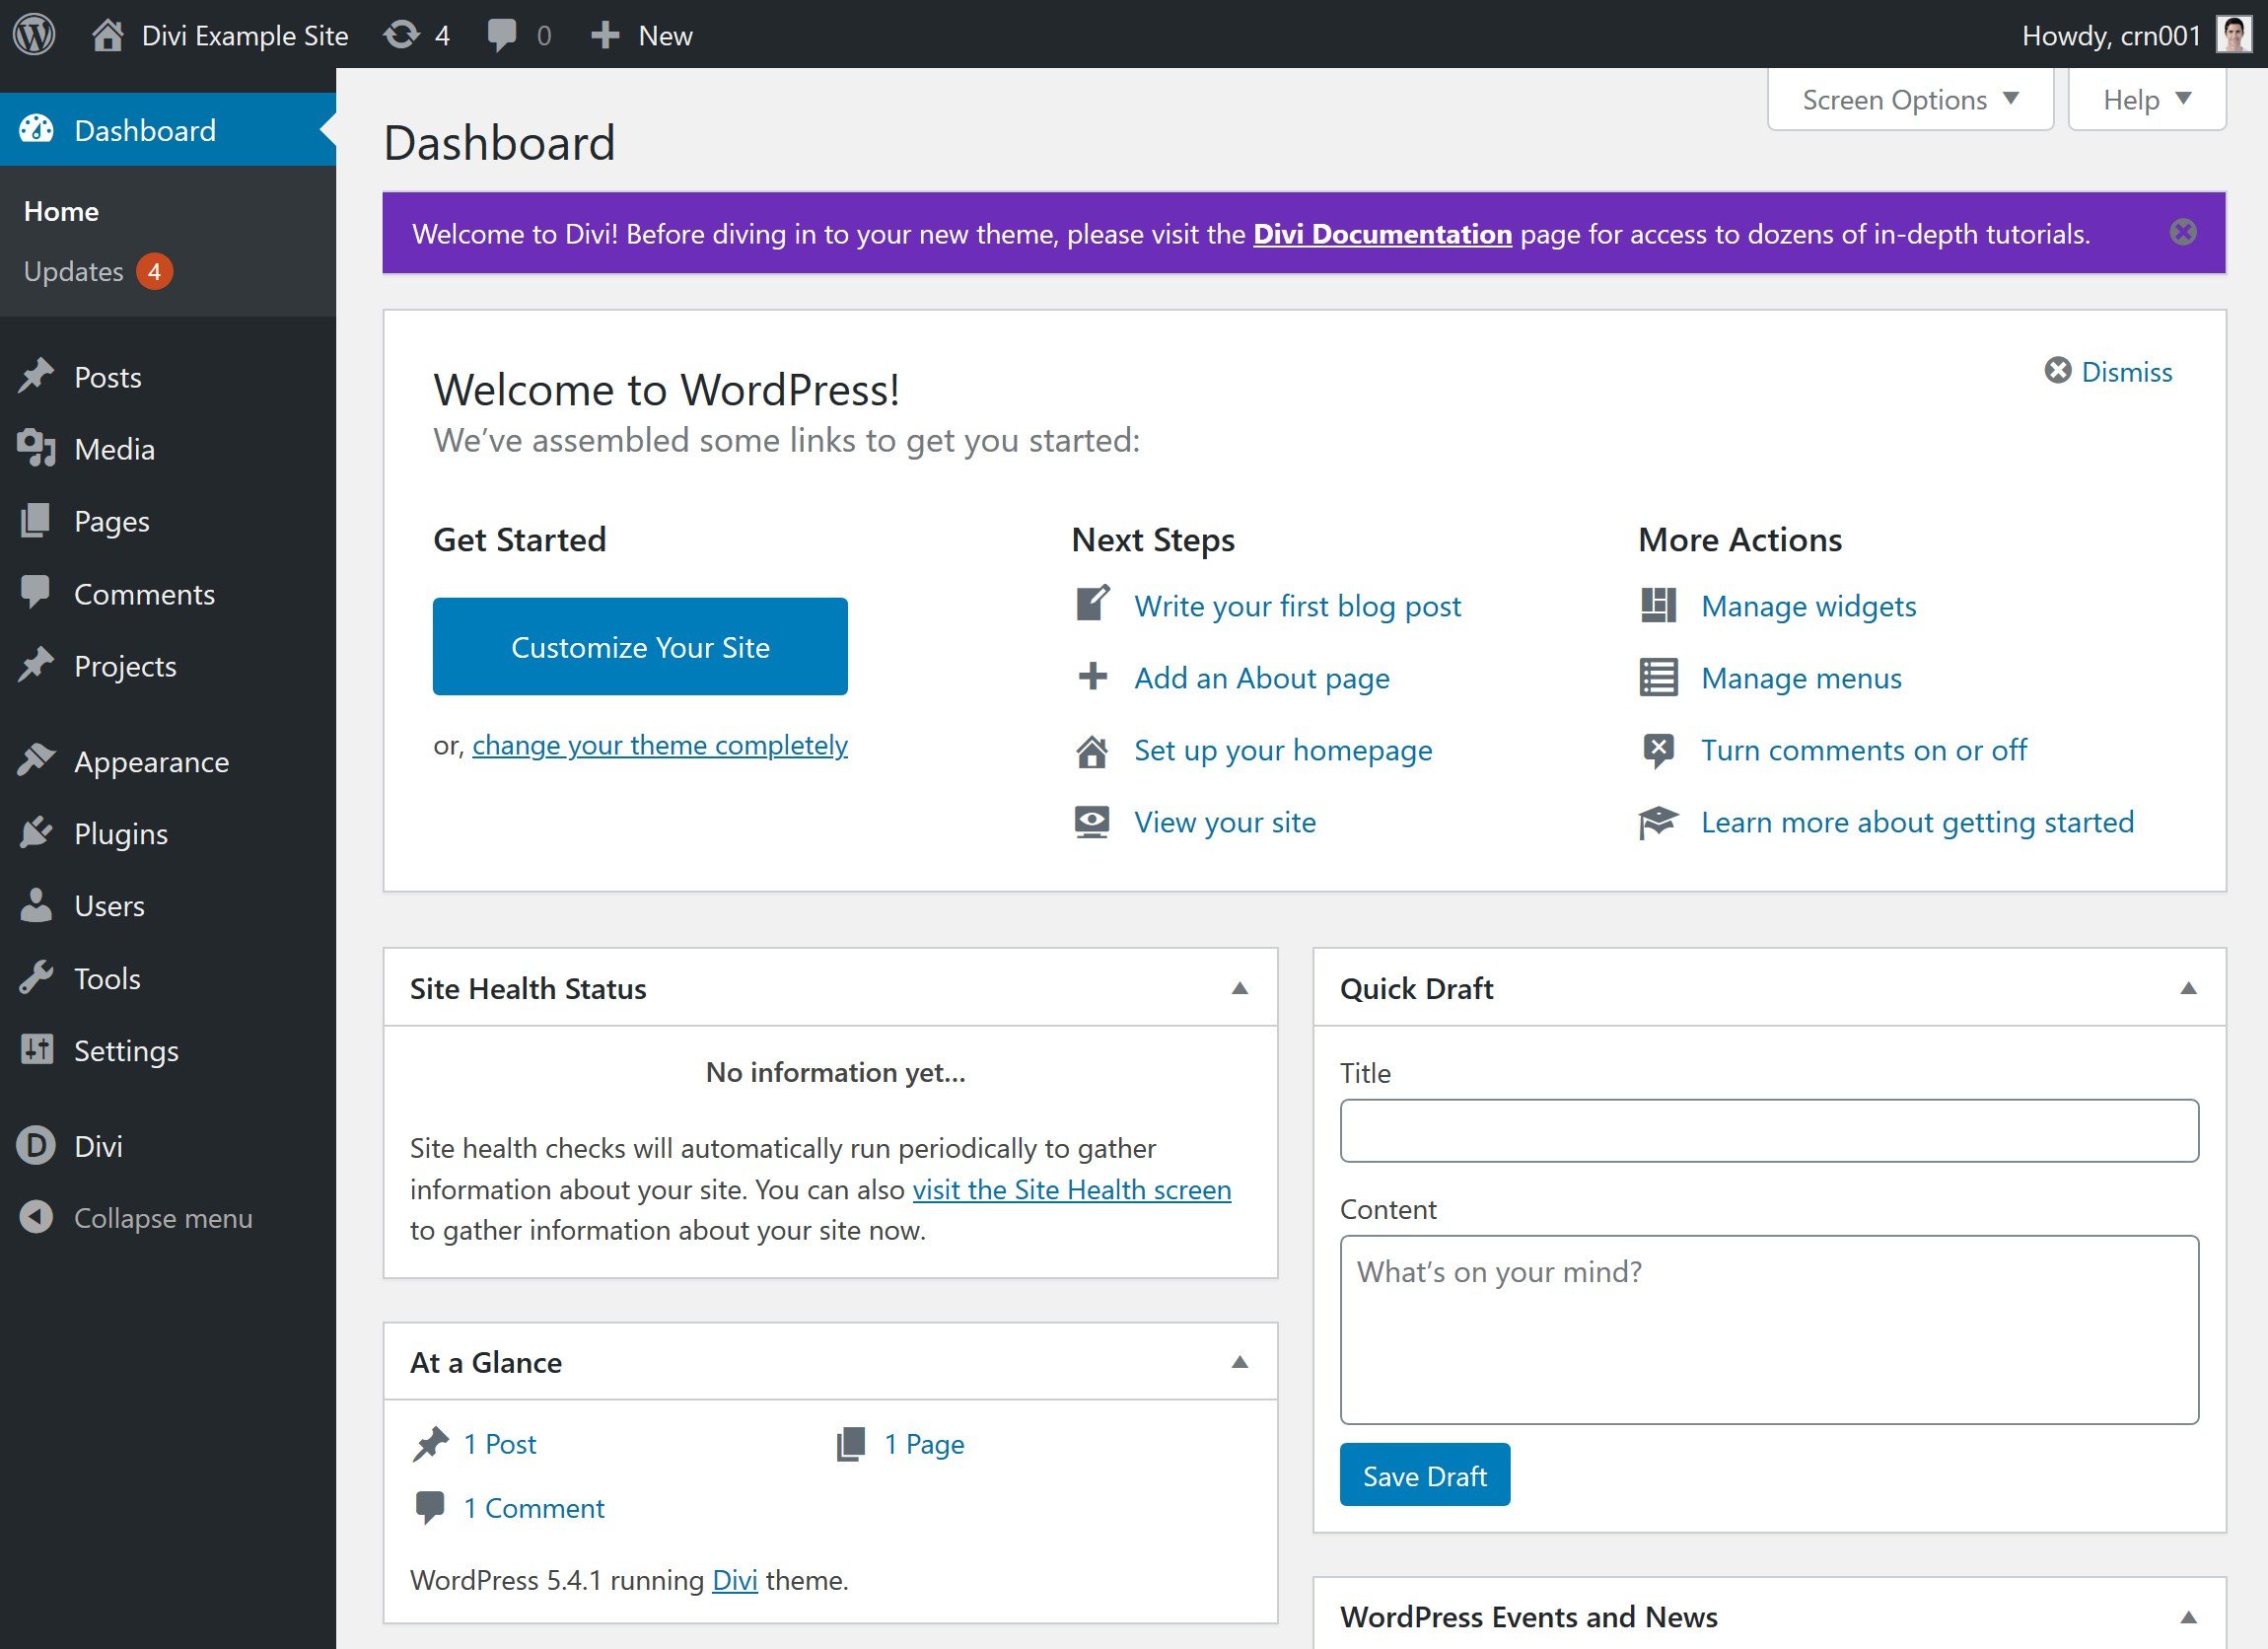 Flywheel pre-installs and activates the Divi theme for you